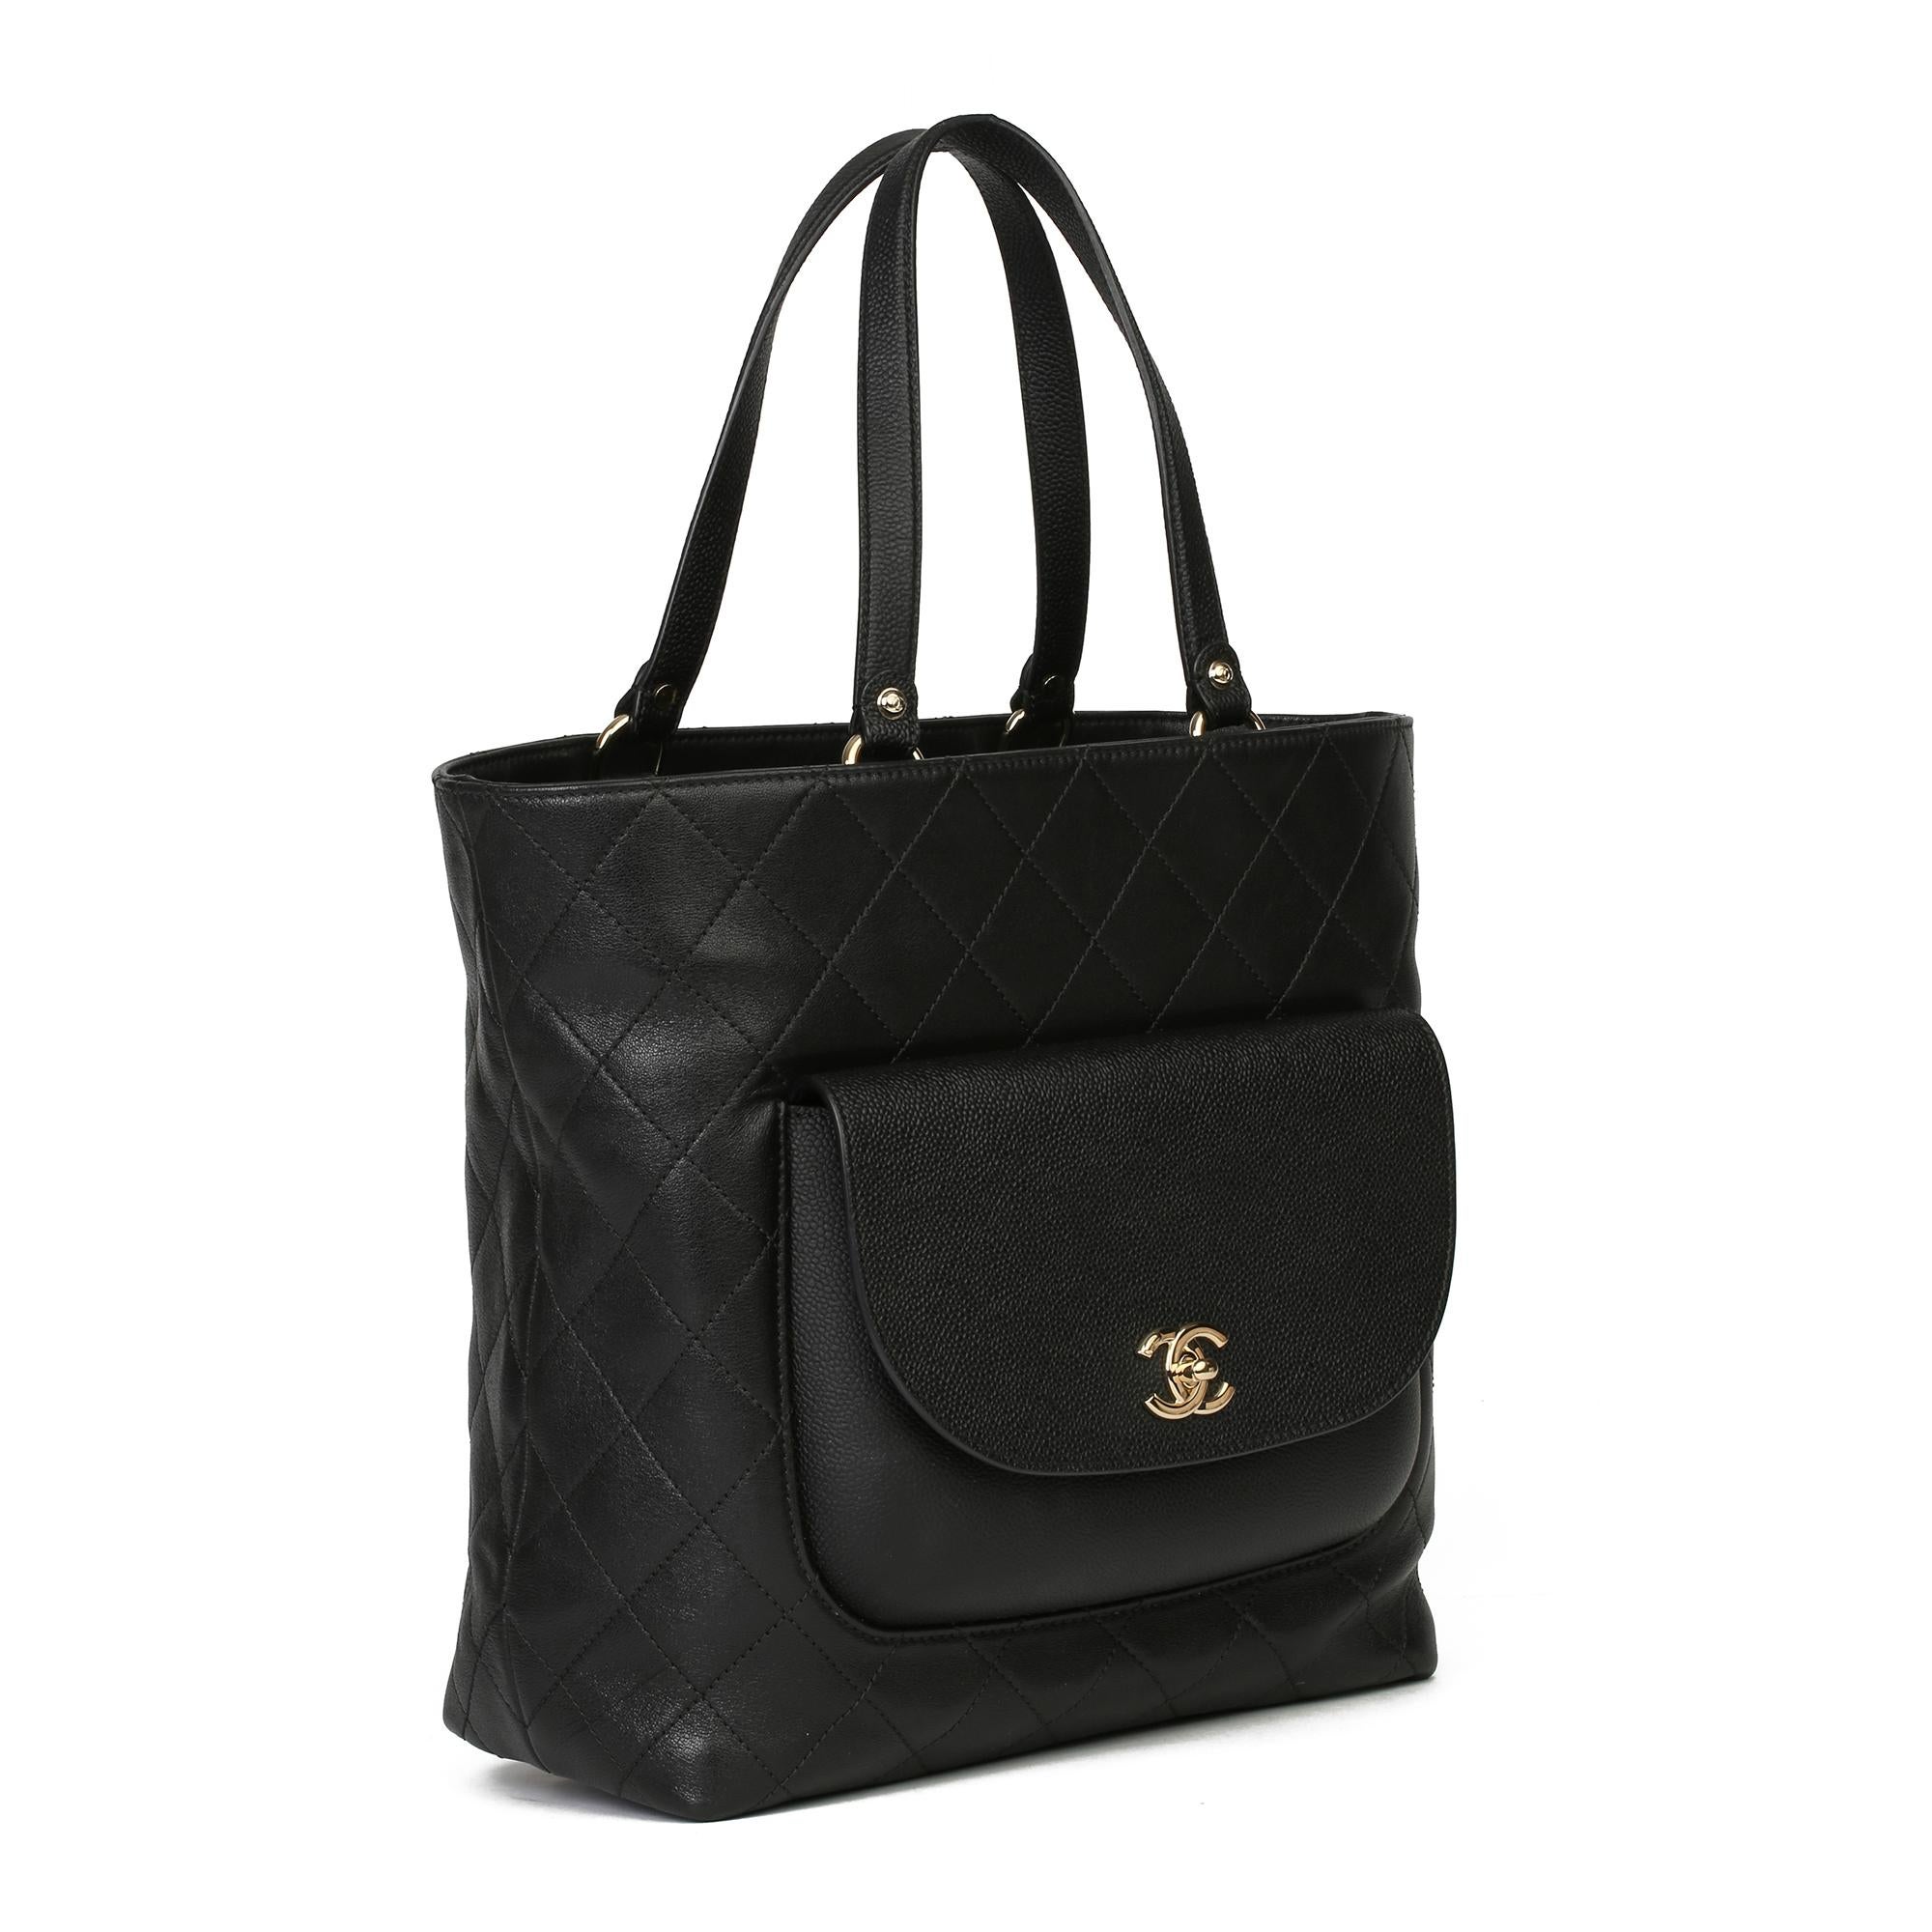 CHANEL
Black Quilted Calfskin & Caviar Leather Classic Tote

Xupes Reference: HB3920
Serial Number: 2458712
Age (Circa): 2018
Accompanied By: Chanel Dust Bag, Box 
Authenticity Details: Authenticity Card, Serial Sticker (Made in Italy) 
Gender: